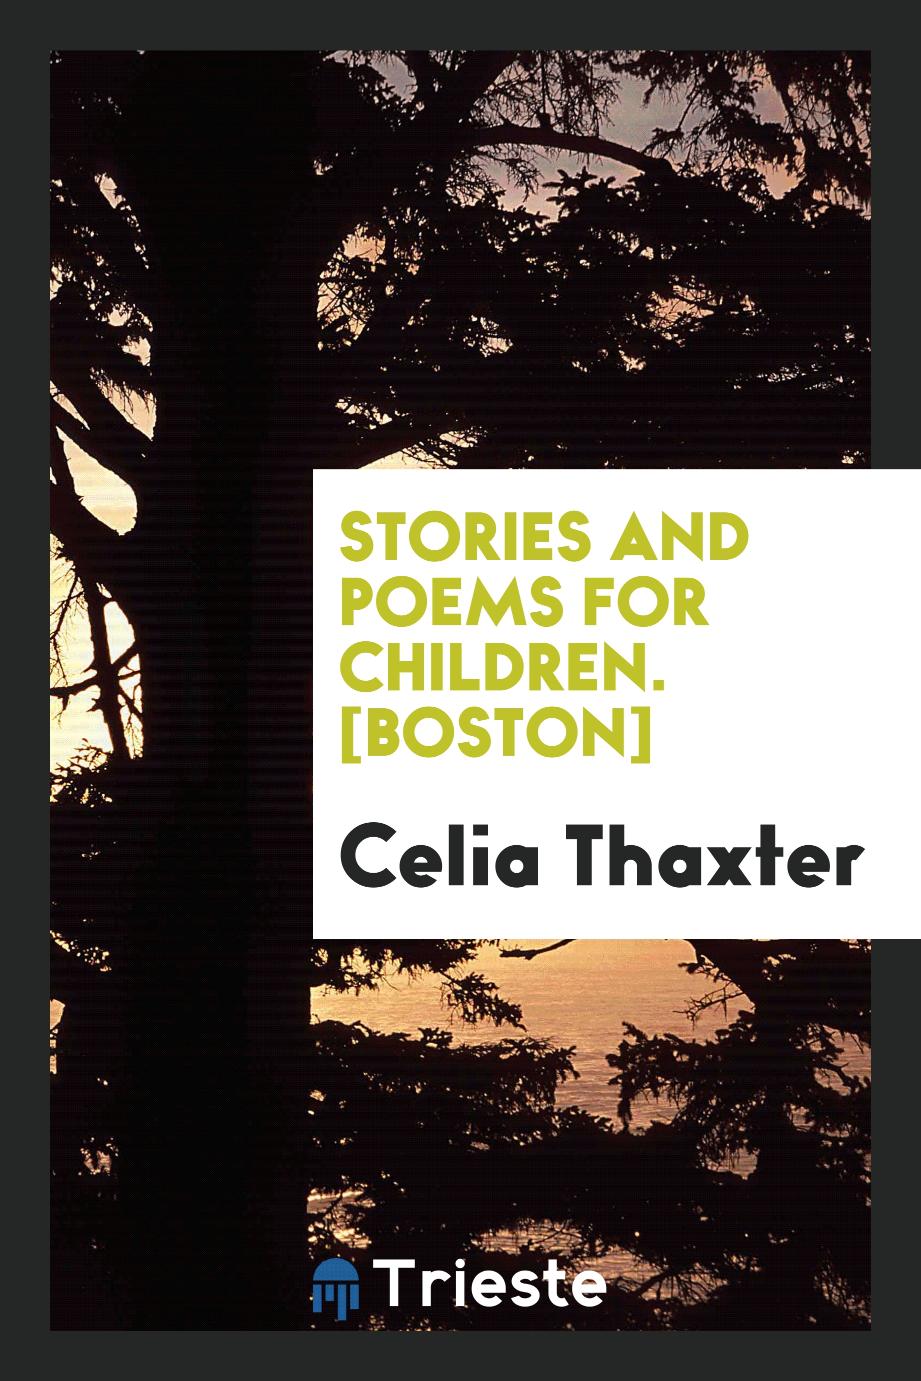 Celia Thaxter - Stories and Poems for Children. [Boston]